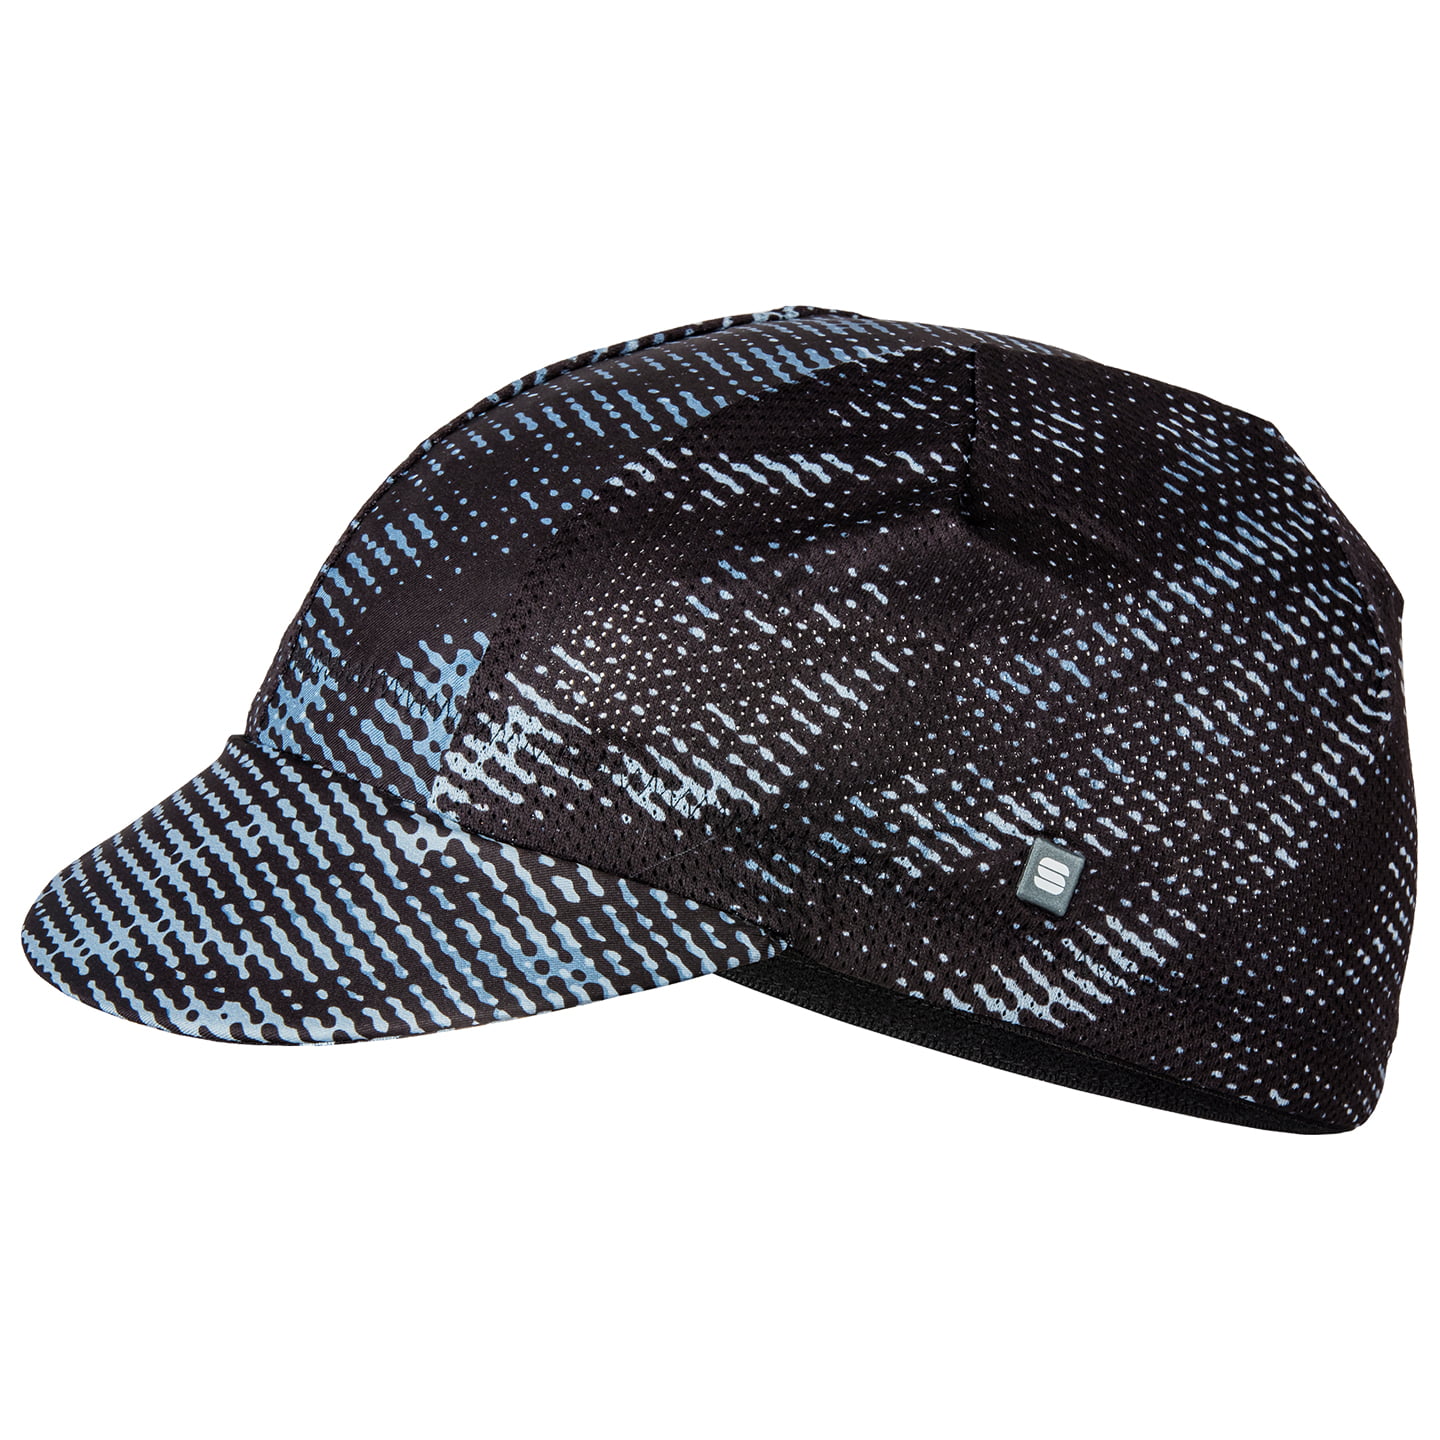 SPORTFUL Cliff Cycling Cap Peaked Cycling Cap, for men, Cycling clothing